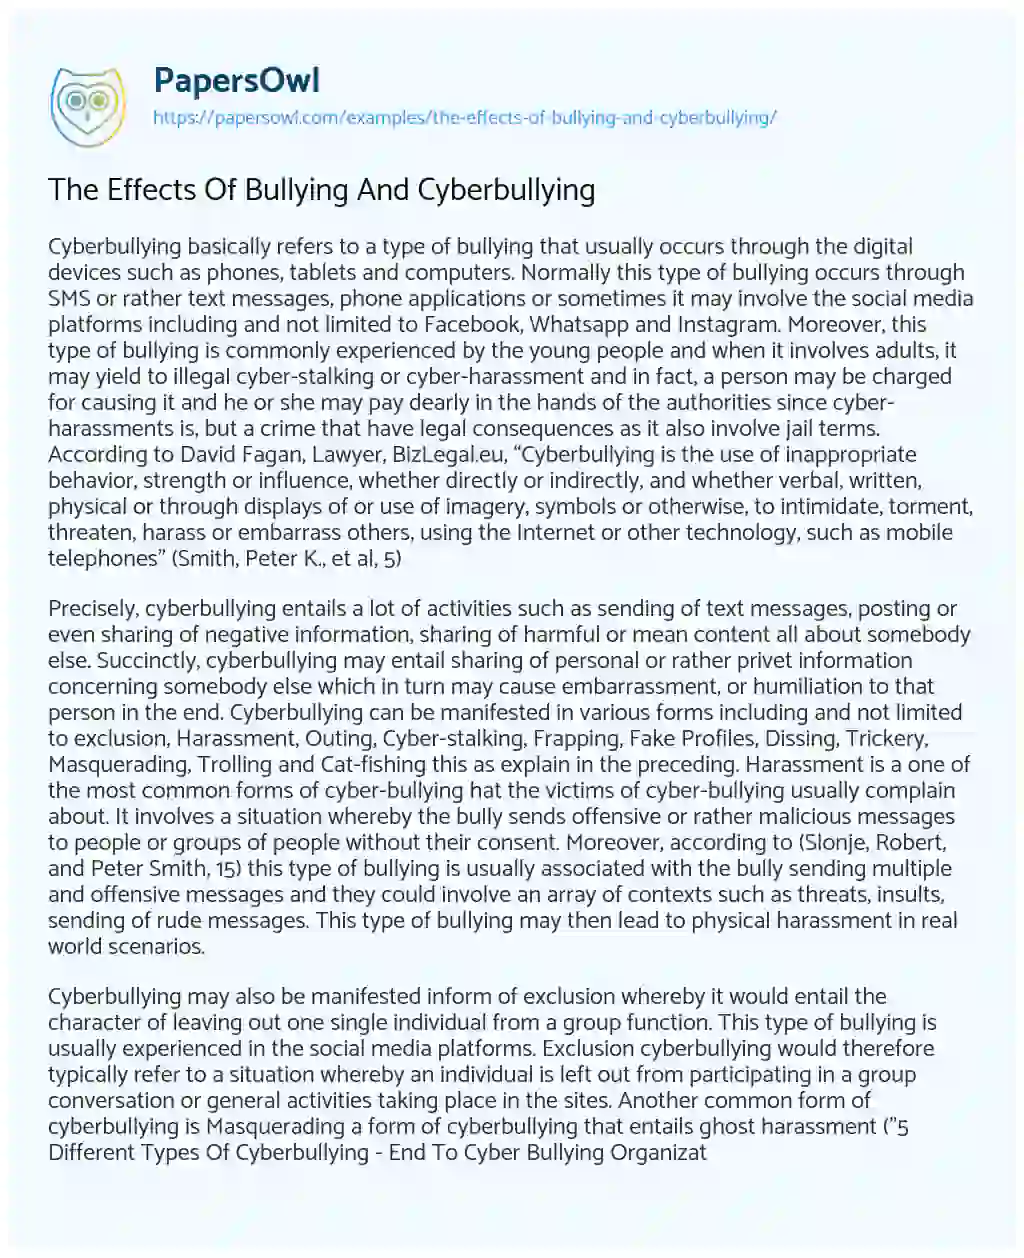 The Effects of Bullying and Cyberbullying essay